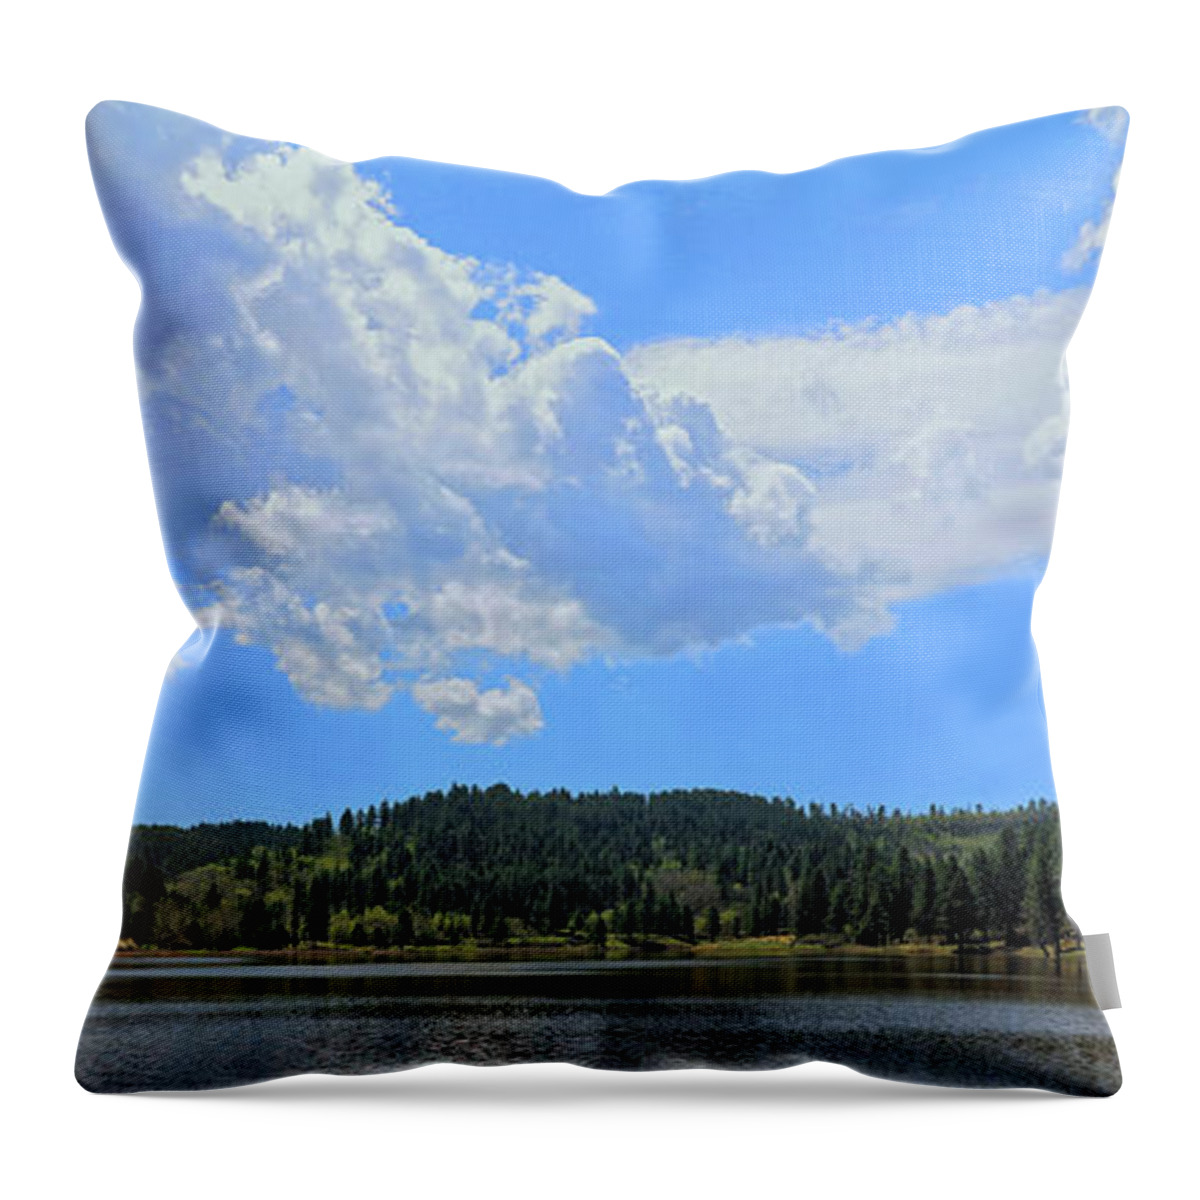 Lake Throw Pillow featuring the photograph Cook Lake by Doolittle Photography and Art